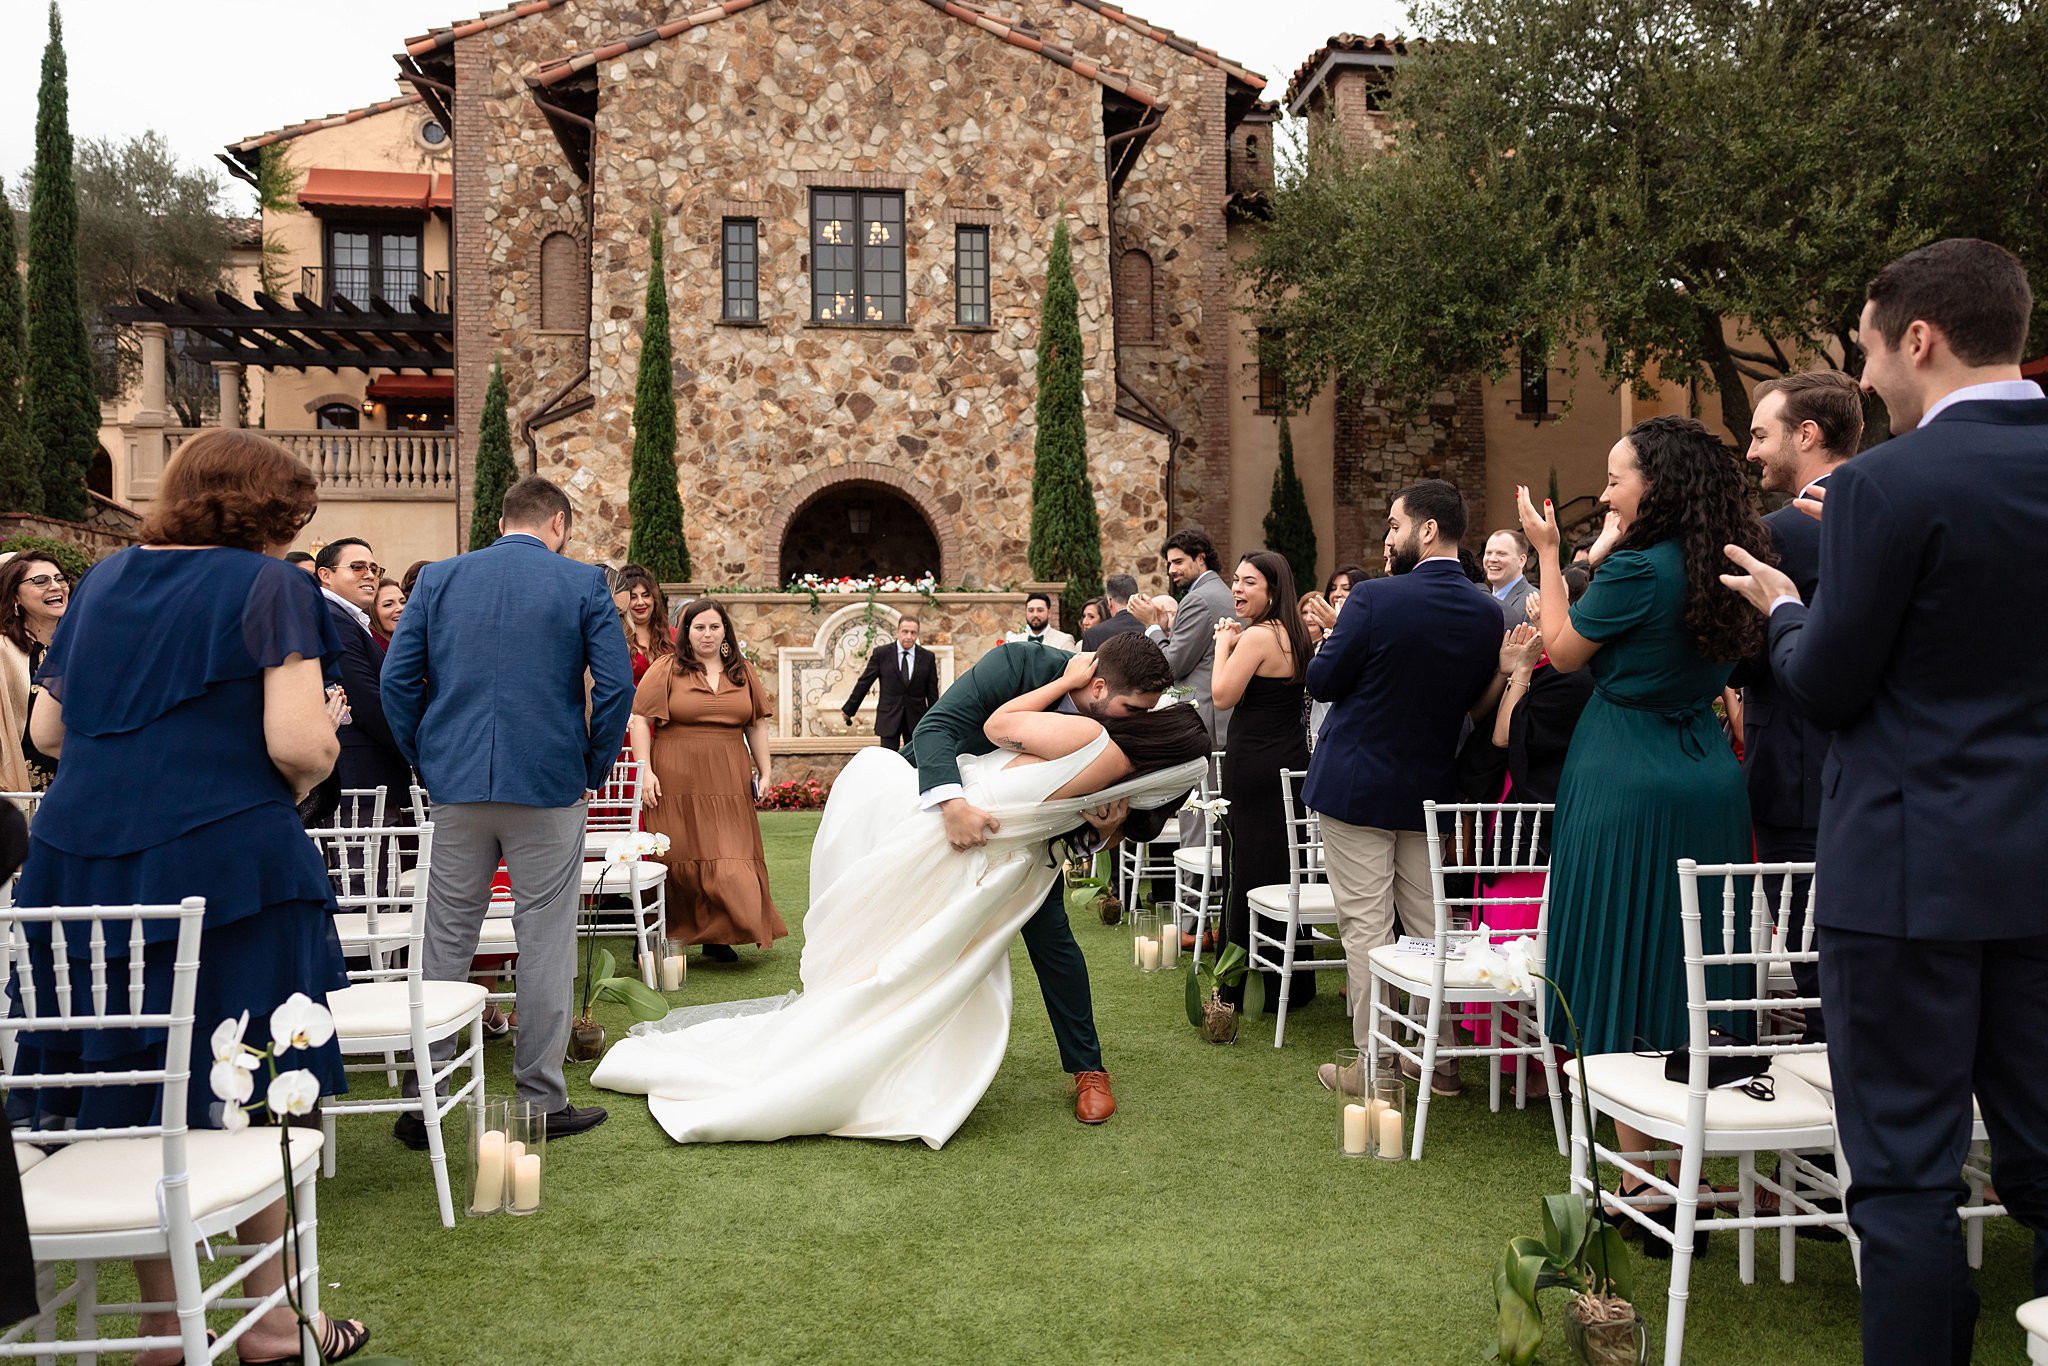 Newlyweds dip and kiss in the aisle of their lawn ceremony at the club at bella collina wedding venue